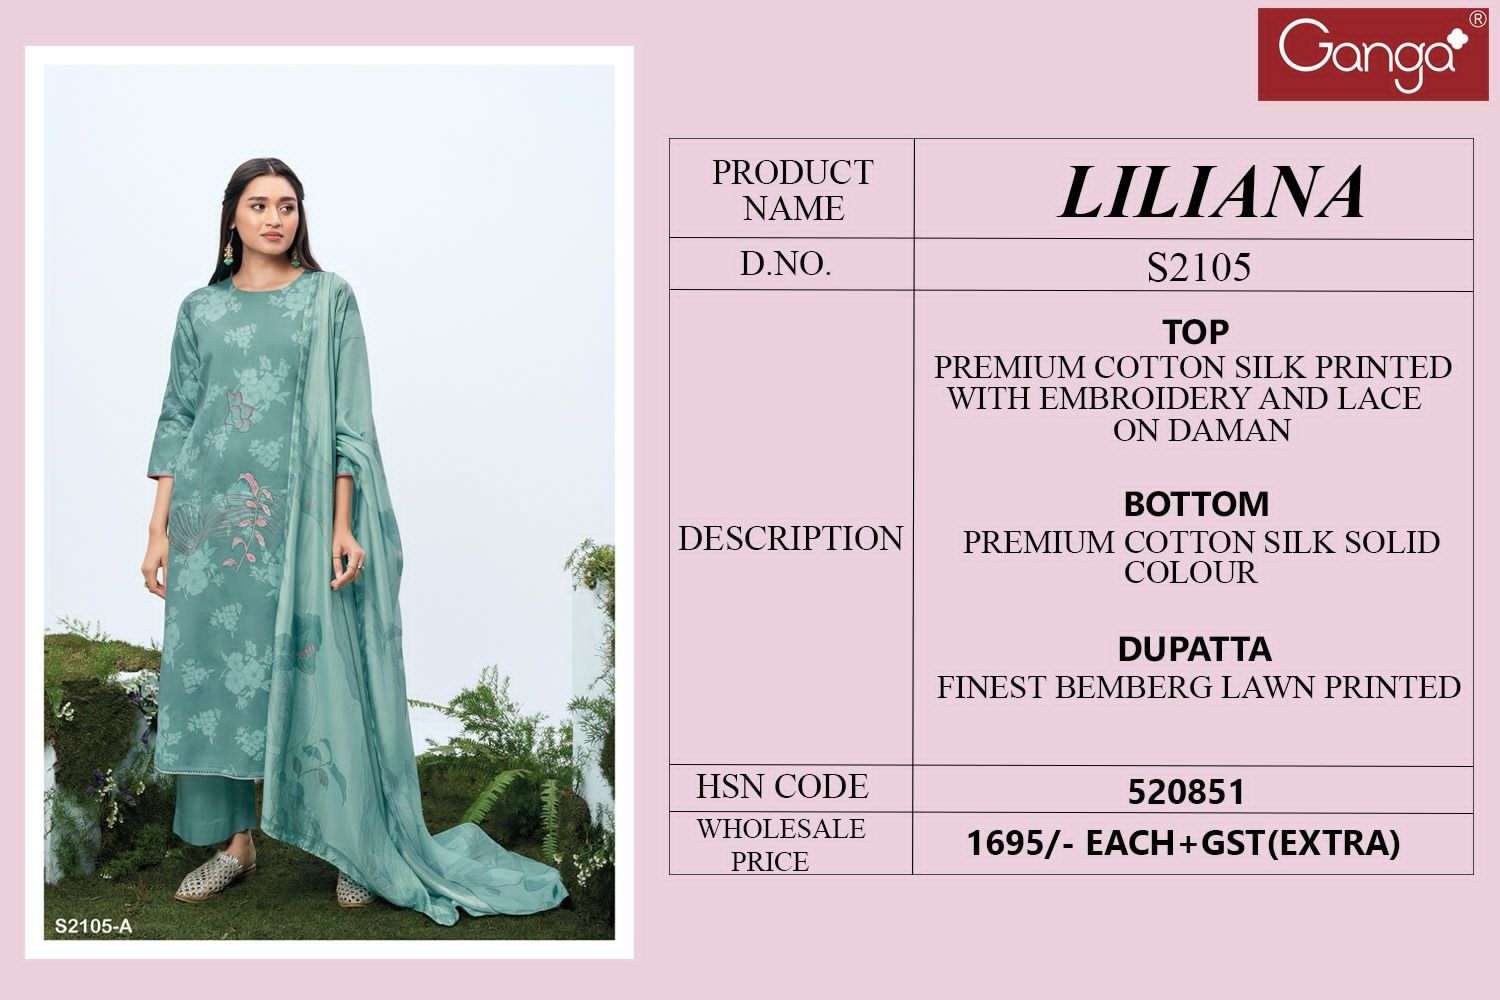 Ganga Presents liliana 2105 Colours Silk Organza Embroidery work Salwar Suits Collection At wholesale Price